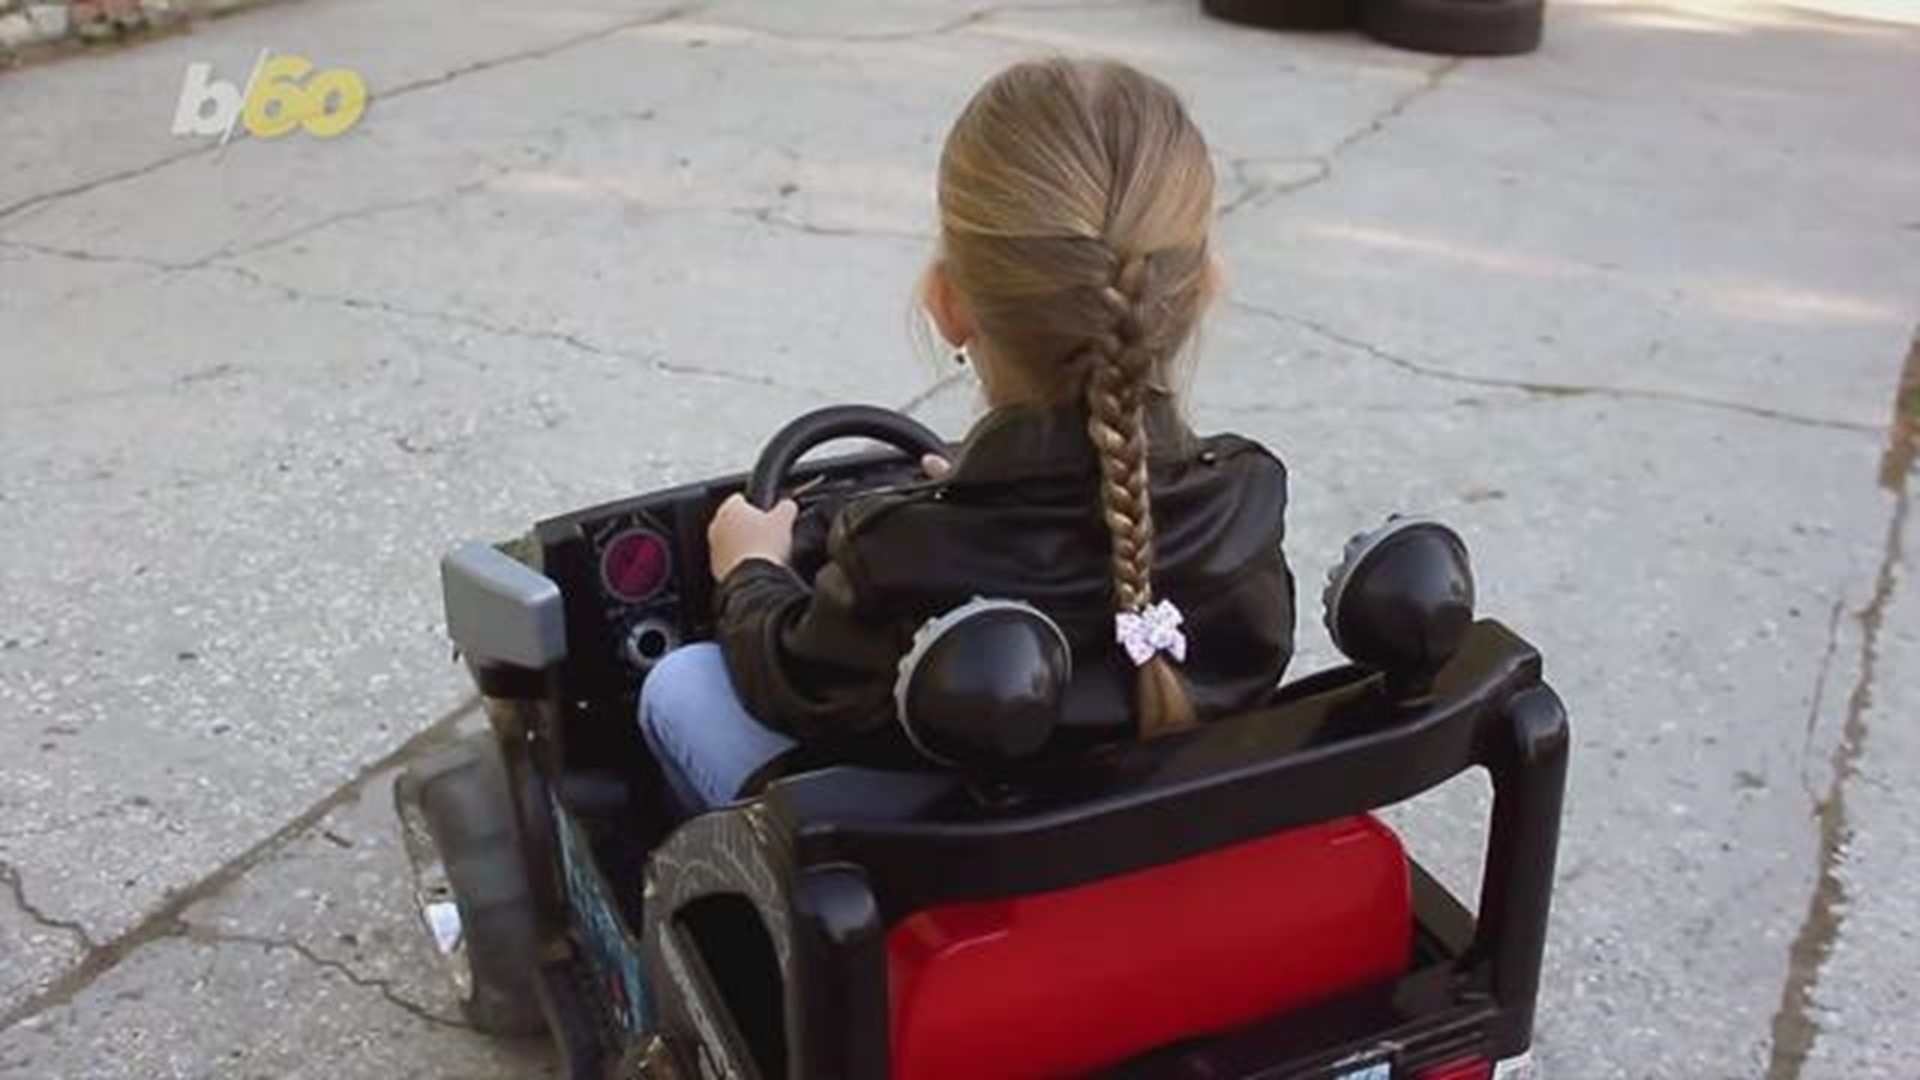 When is the right time for a toddler to start operating a motor vehicle? Keri Lumm shares the unbelievable footage of a toddler behind the wheel of a motorcycle.